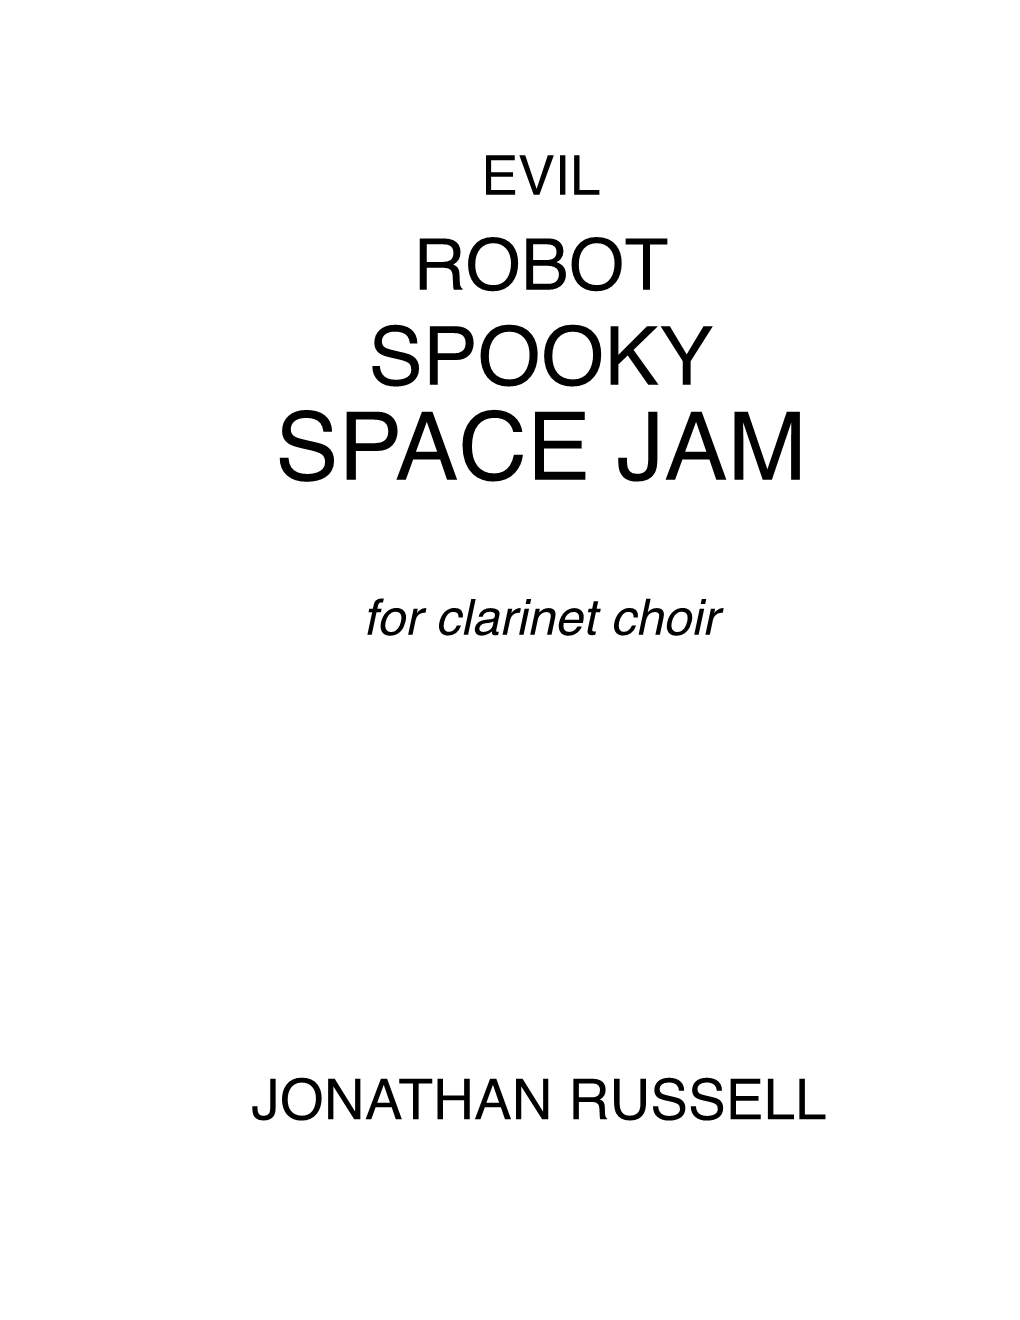 EVIL ROBOT SPOOKY SPACE JAM for Clarinet Choir by Jonathan Russell